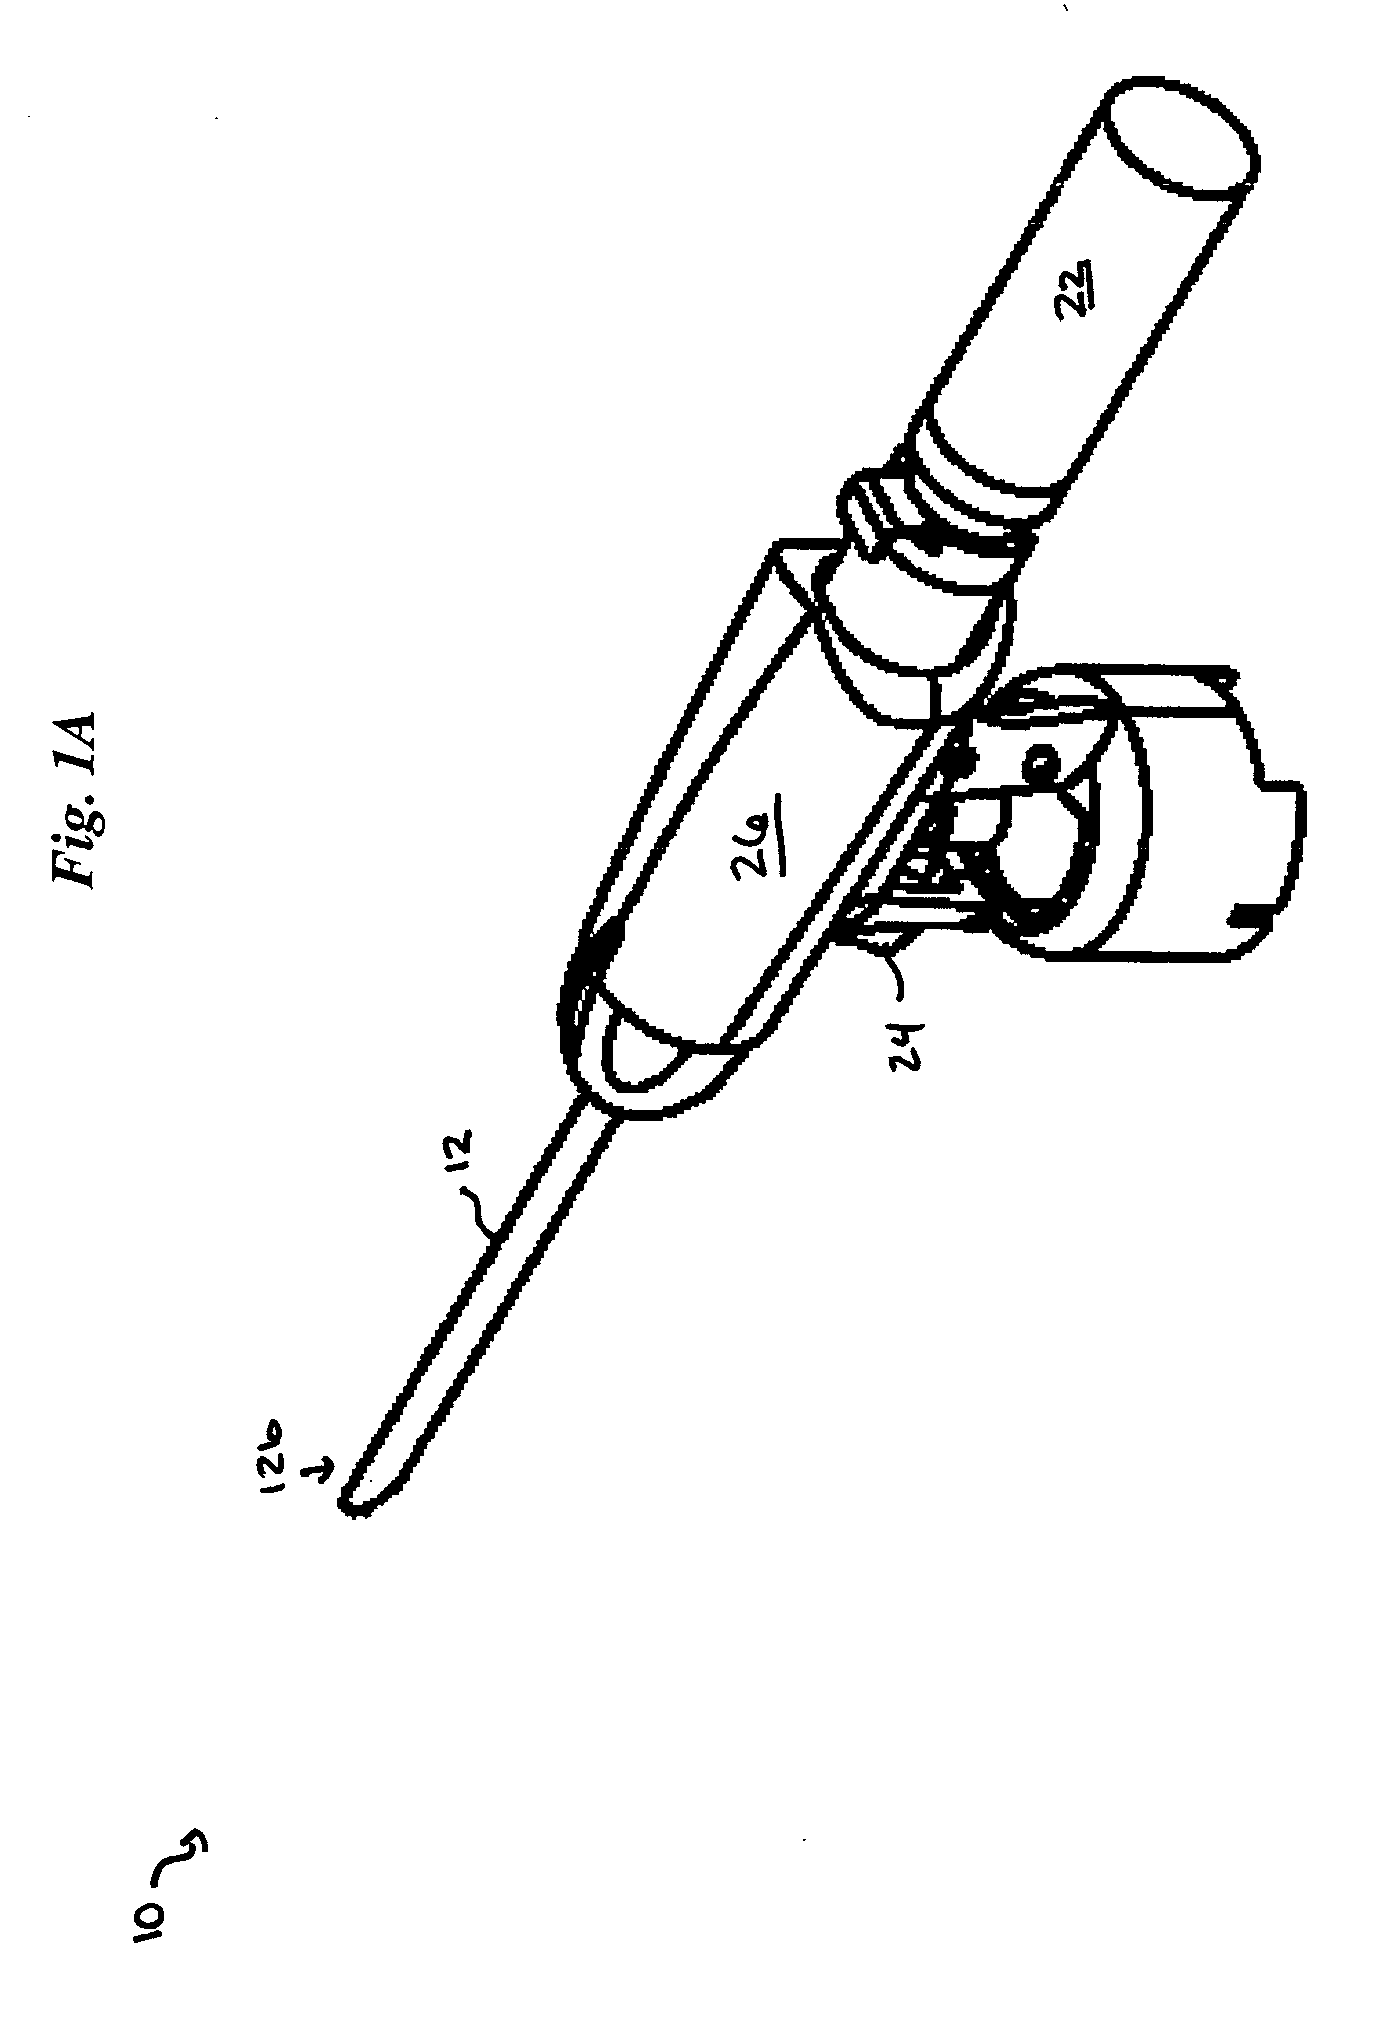 Tissue extraction and maceration device